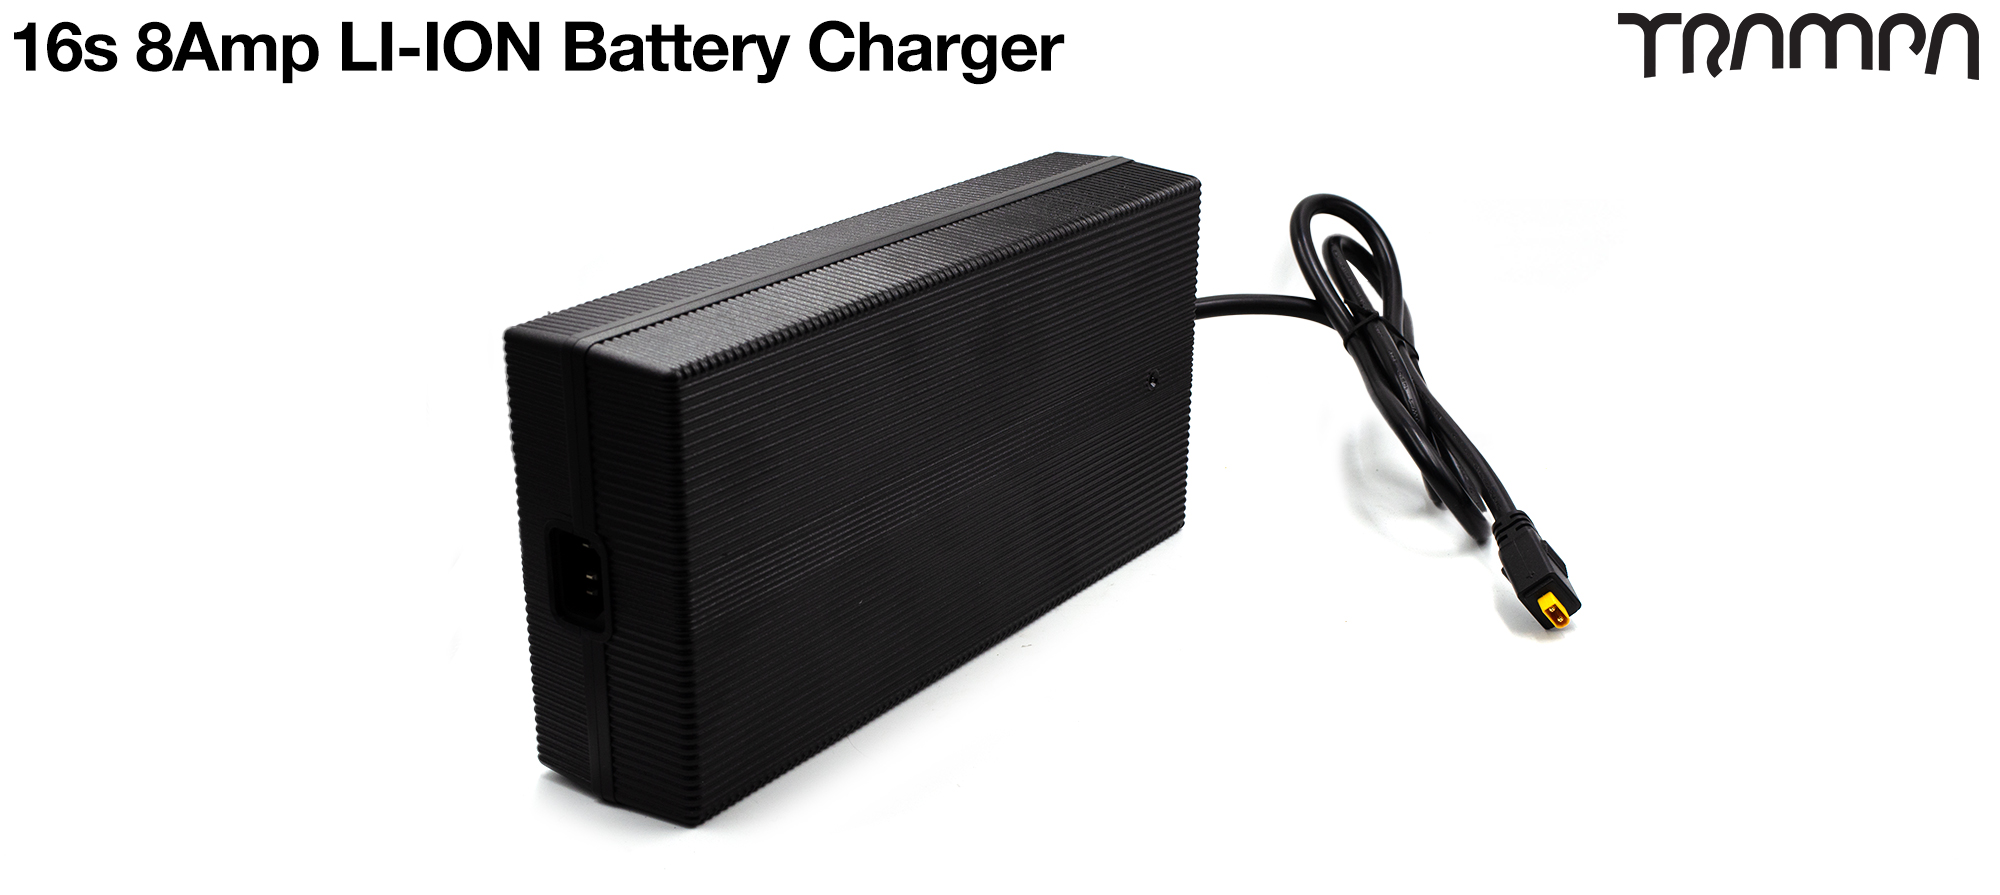 22s 8Amp LI-ION Battery Charger 